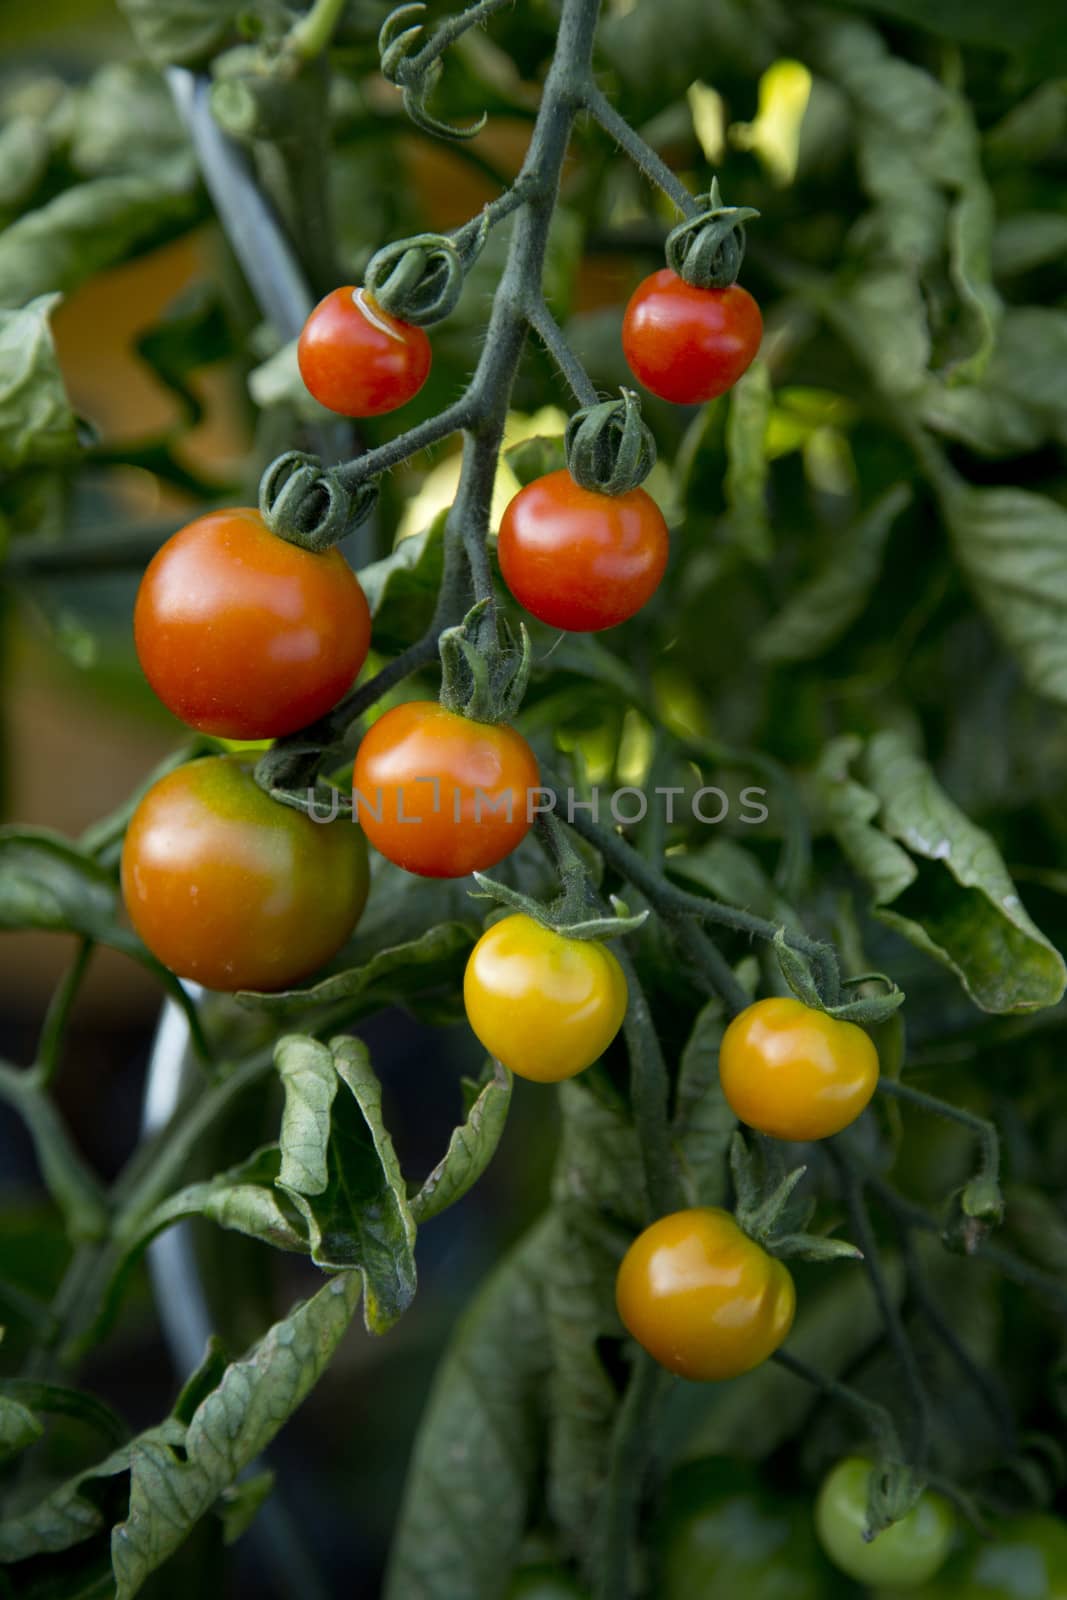 Bunch of tomatoes - 03 by Kartouchken